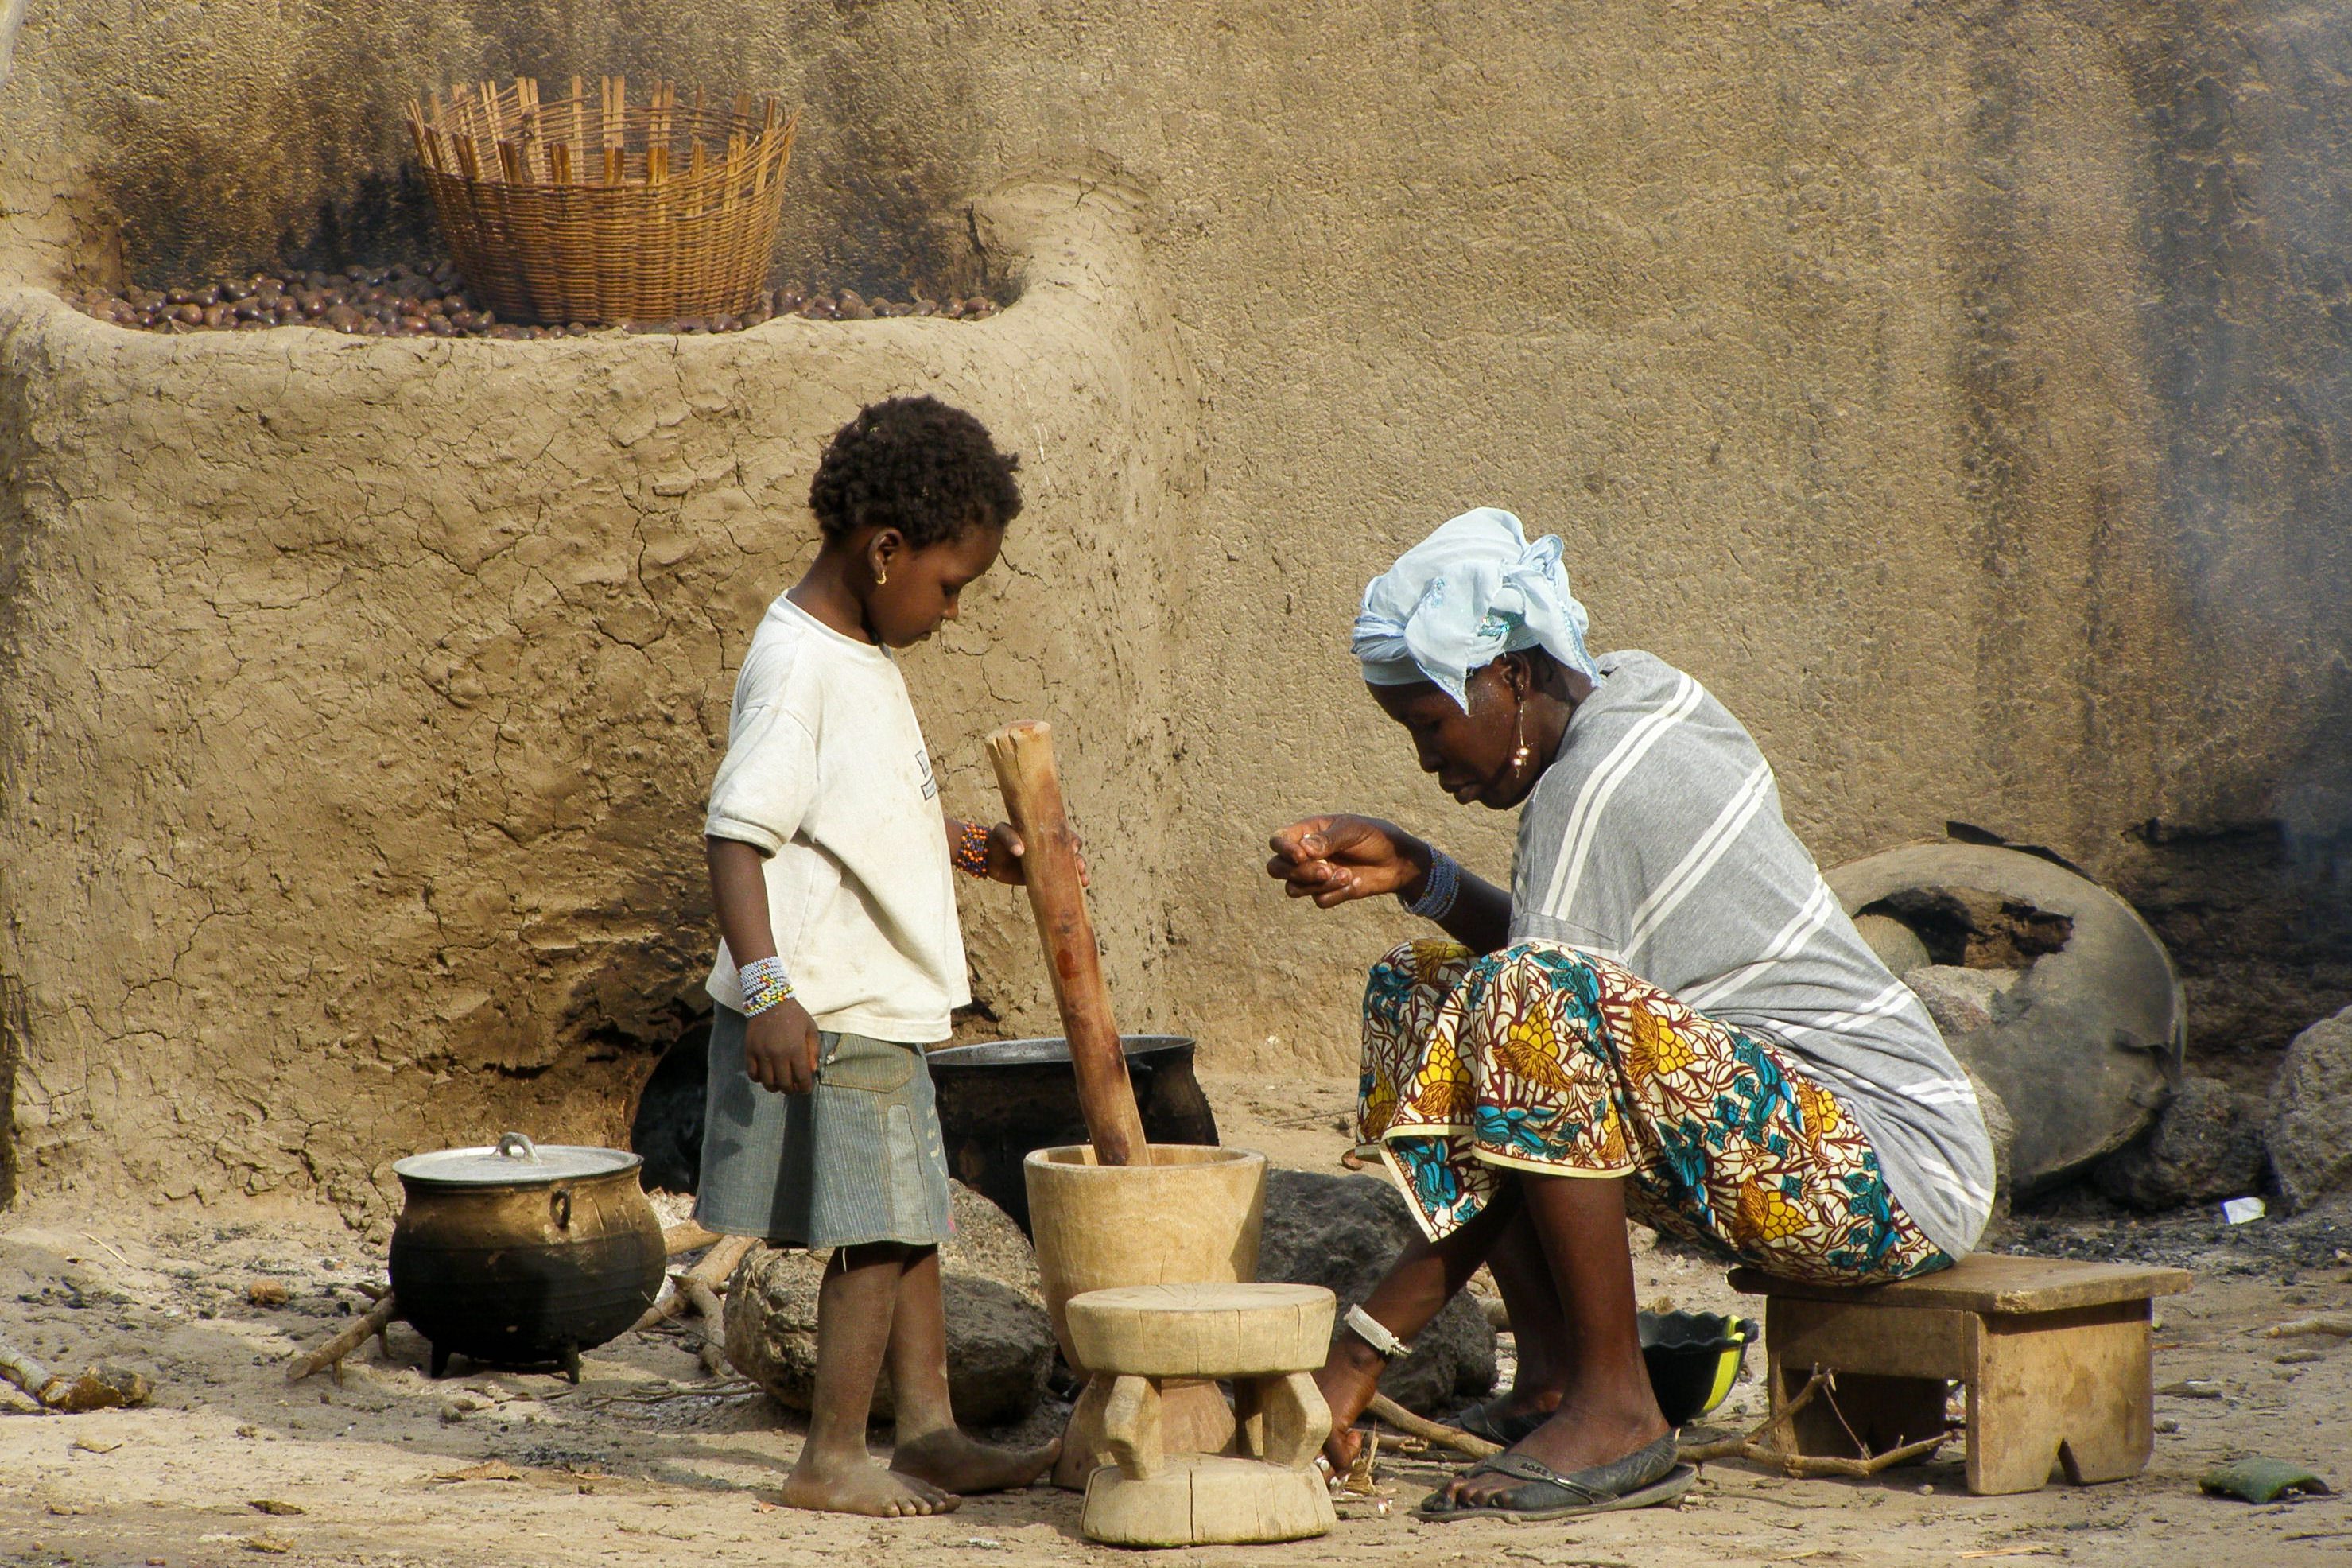 A woman and child cooking in Mali. Wikimedia Commons.